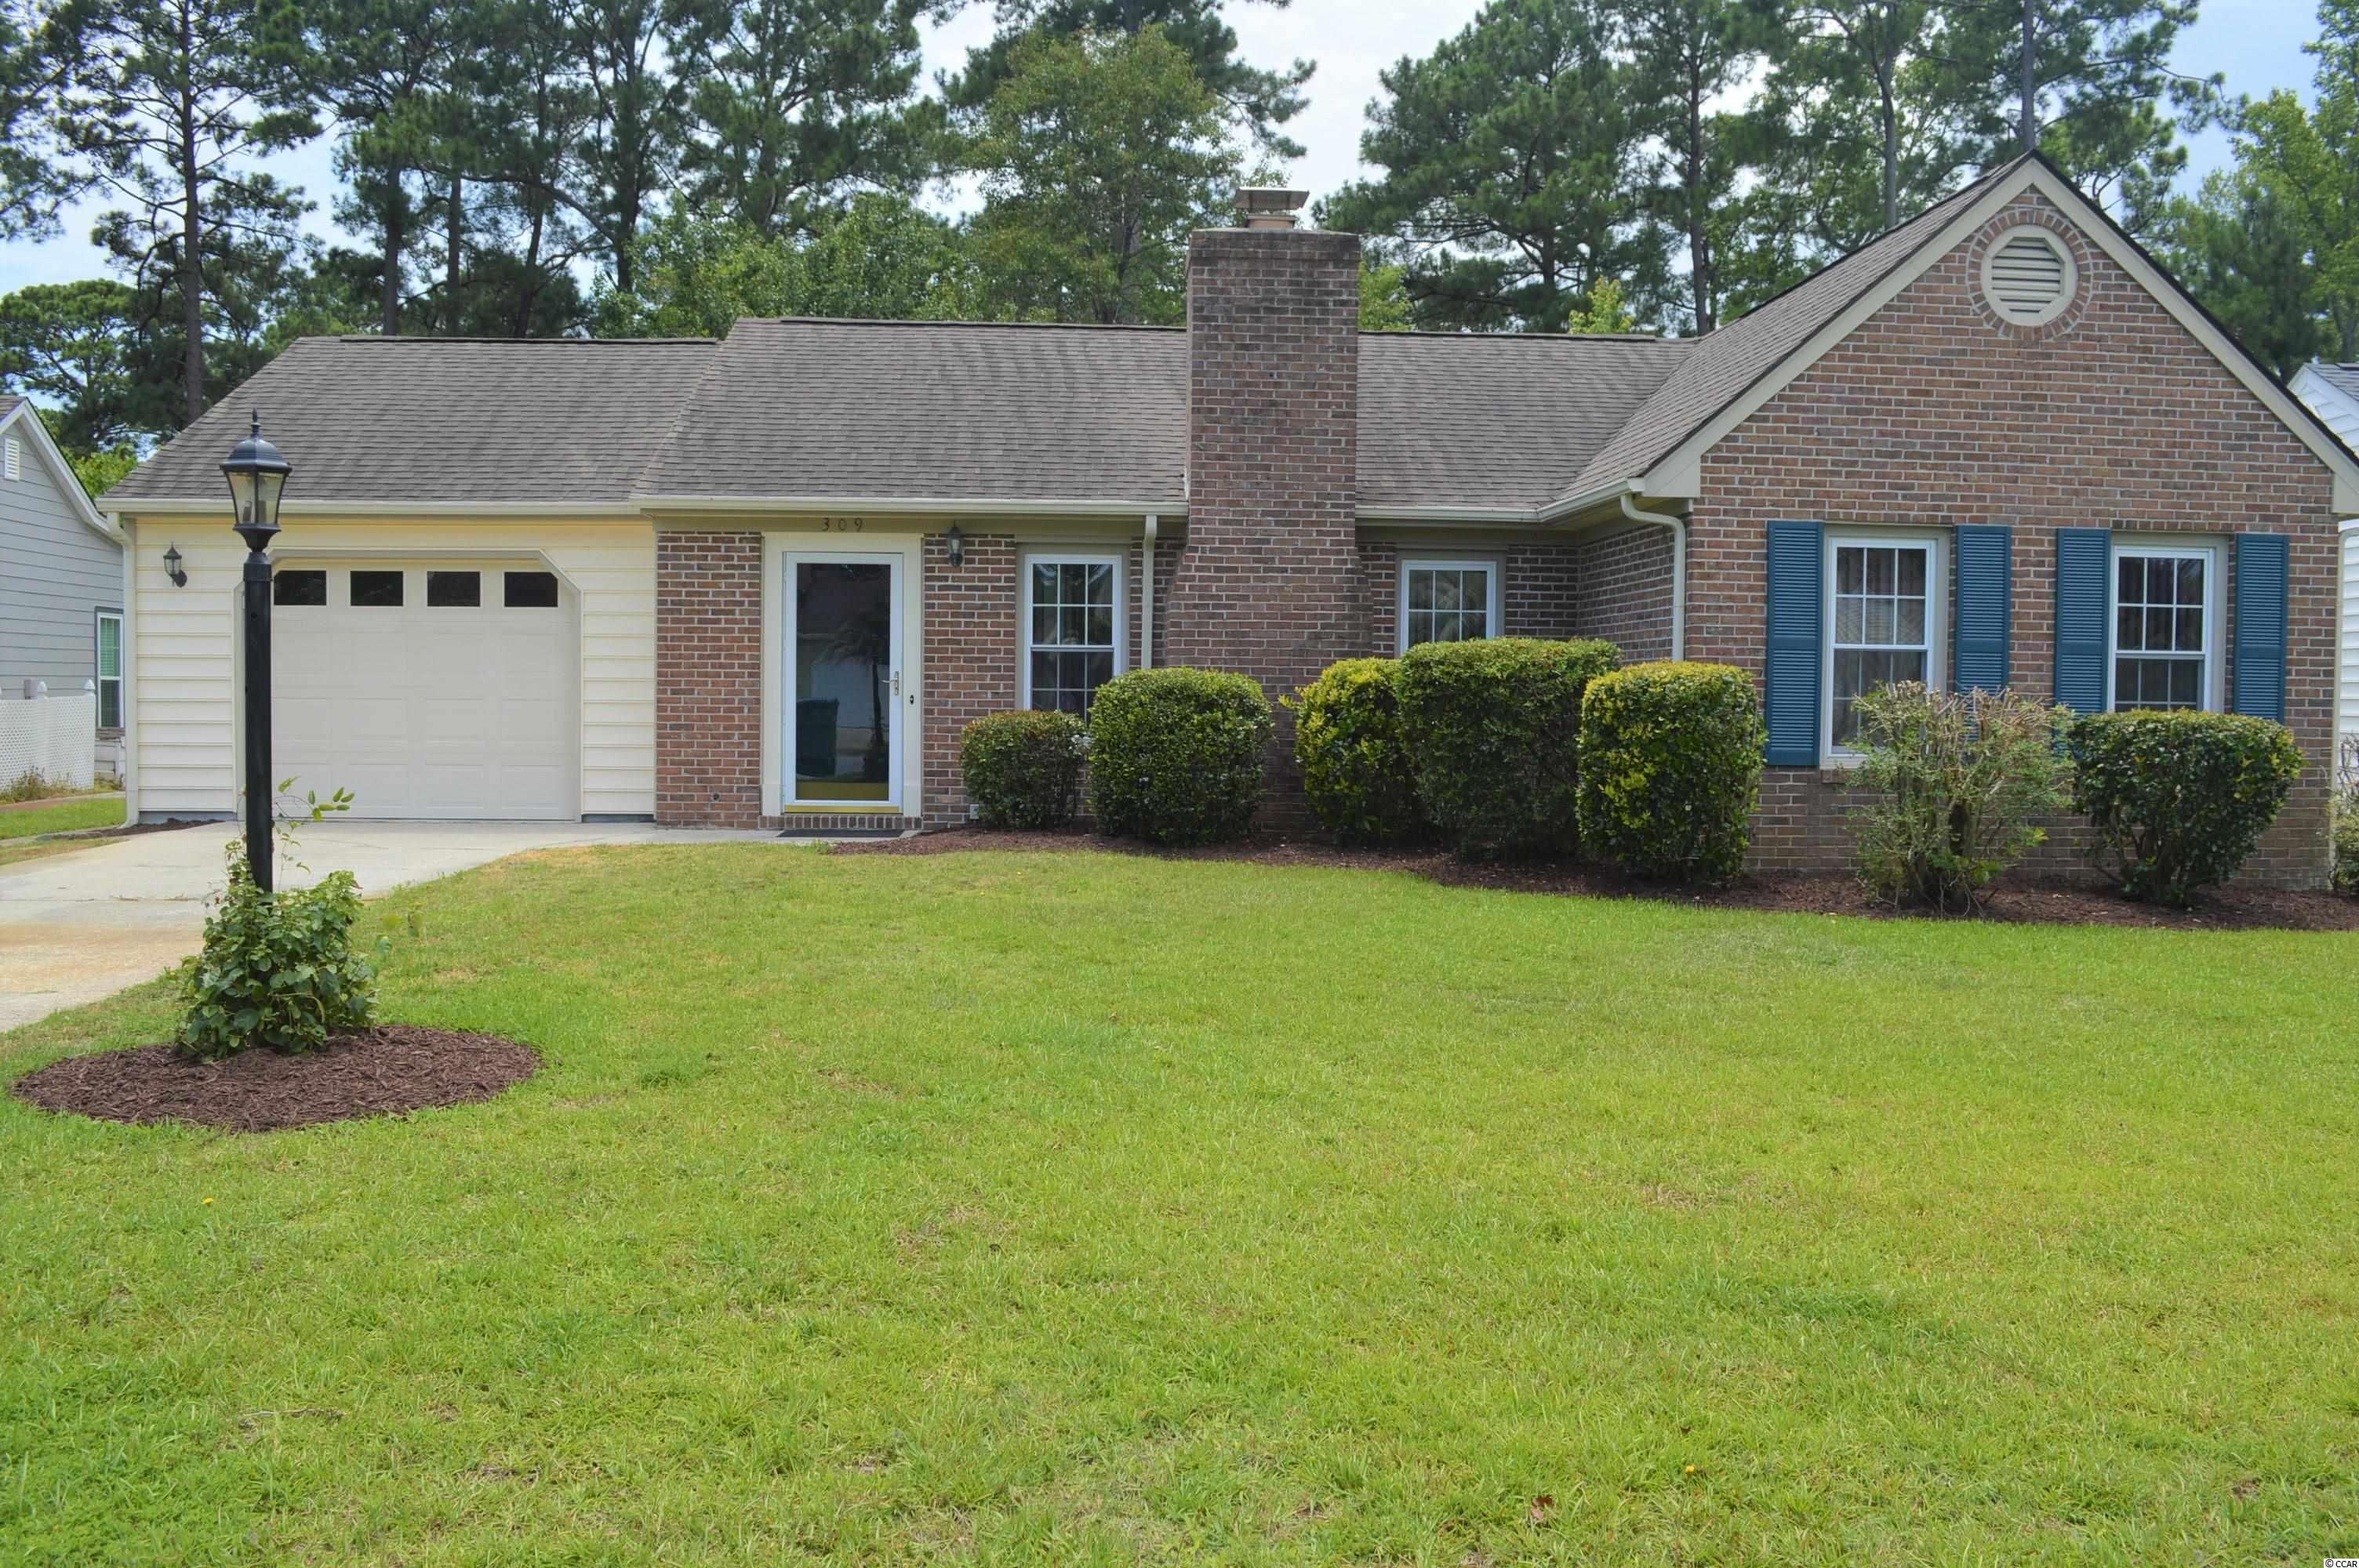 309 Mourning Dove Ln. Murrells Inlet, SC 29576